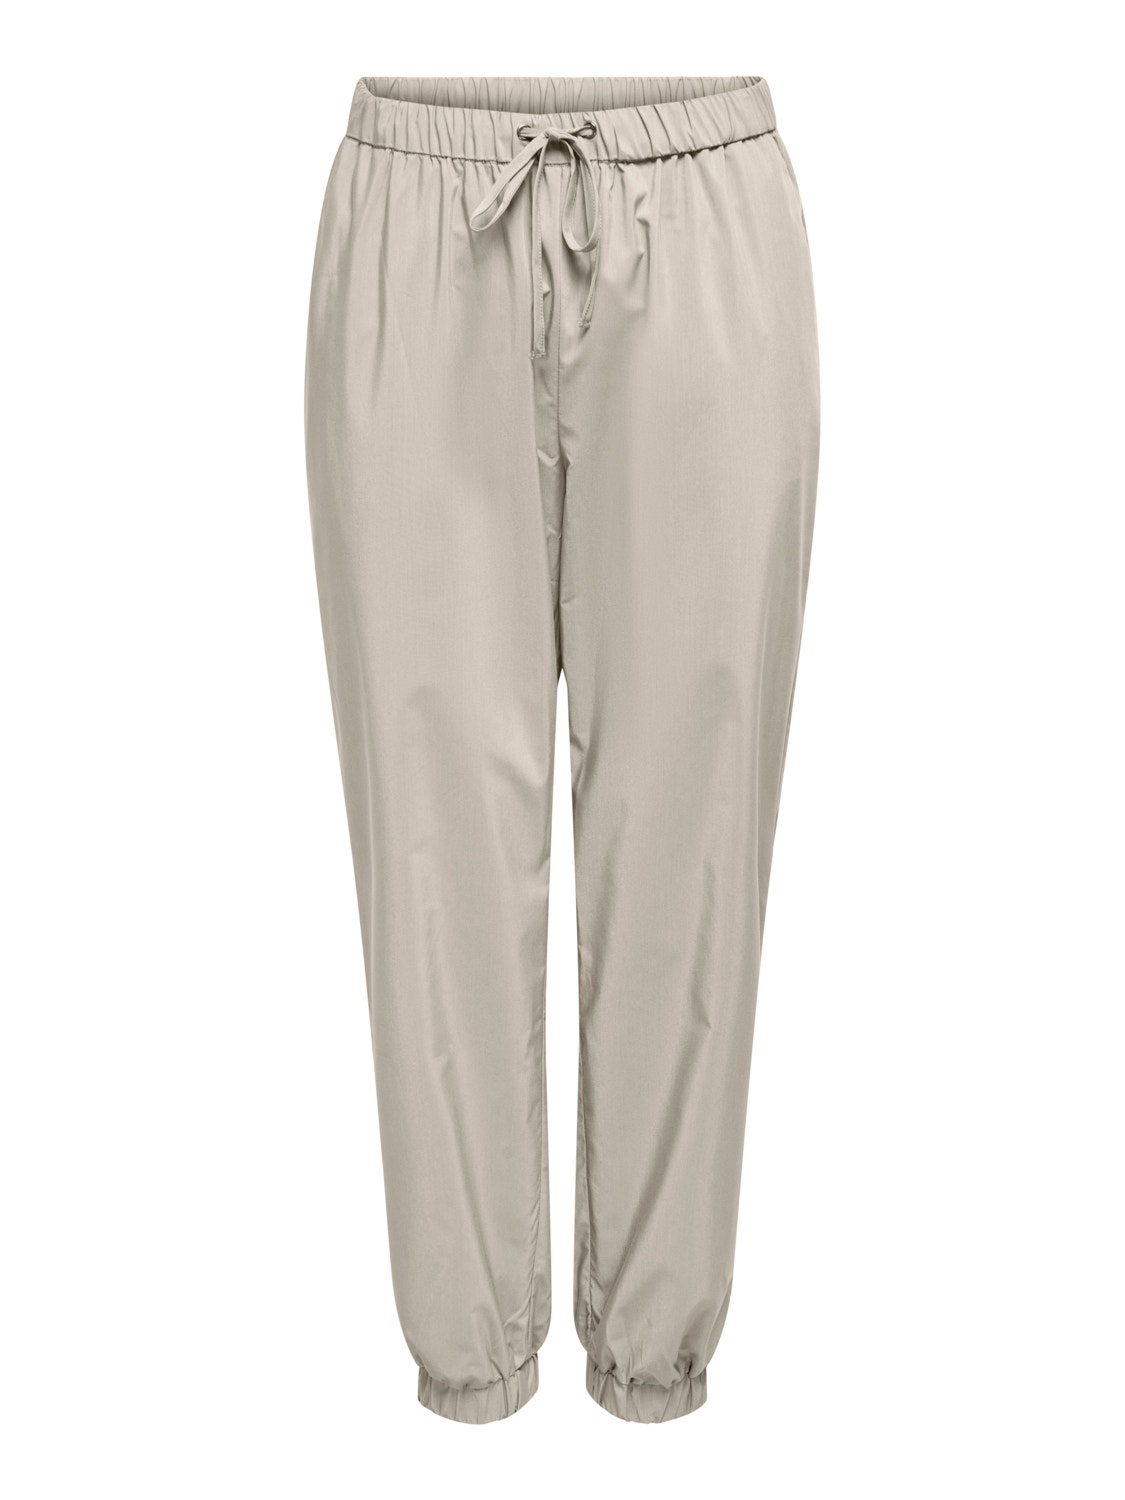 ONLY ONLTIM TRACK PANT WVN -Silver Lining - 15284001